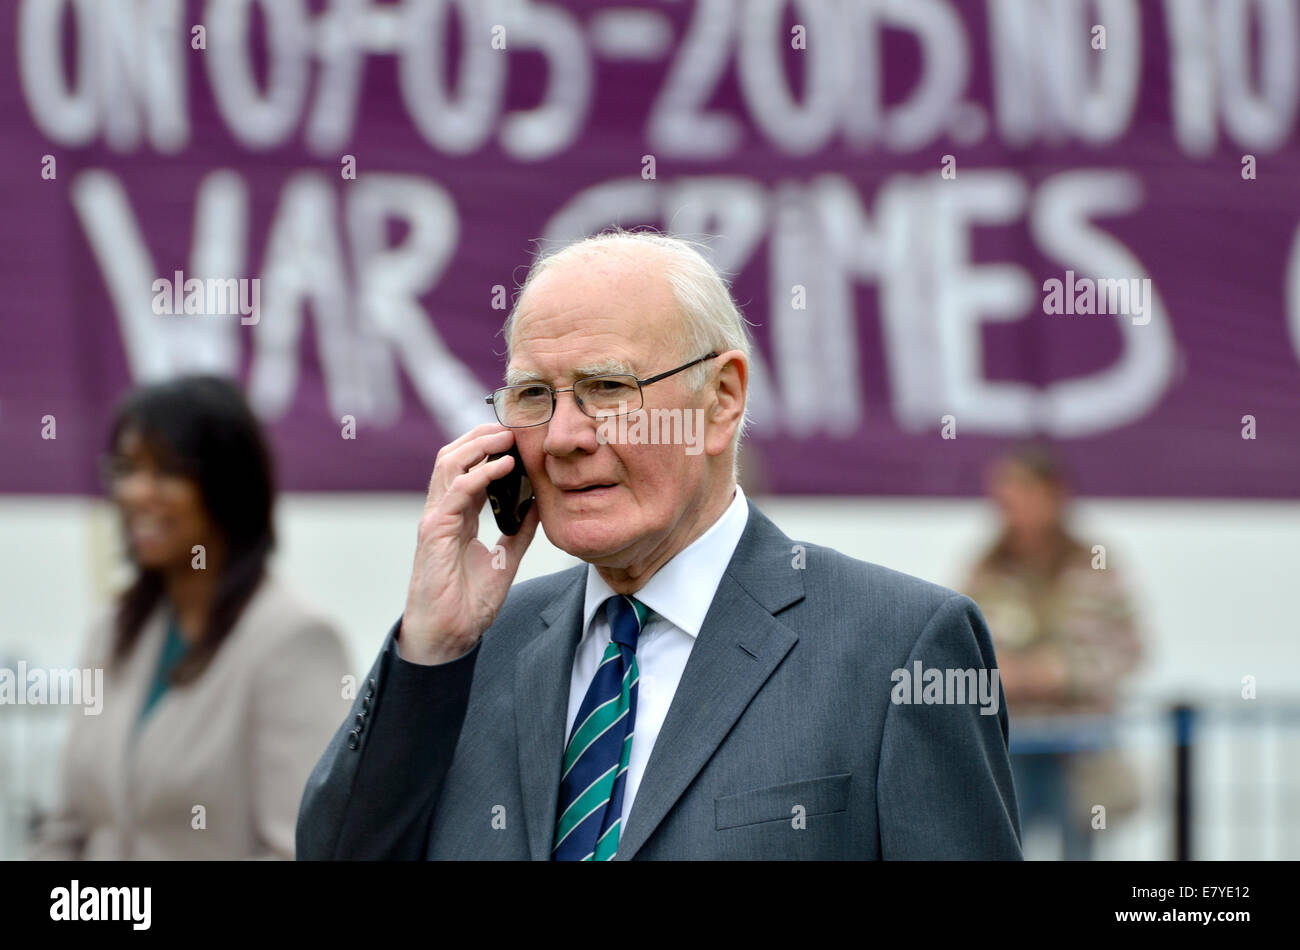 London, UK. 26th Sep, 2014. Ming Campbell (Lib Dem) on his phone outside parliament during the debate going on in Parliament considering air strikes in Iraq against Islamic State / IS. Stock Photo